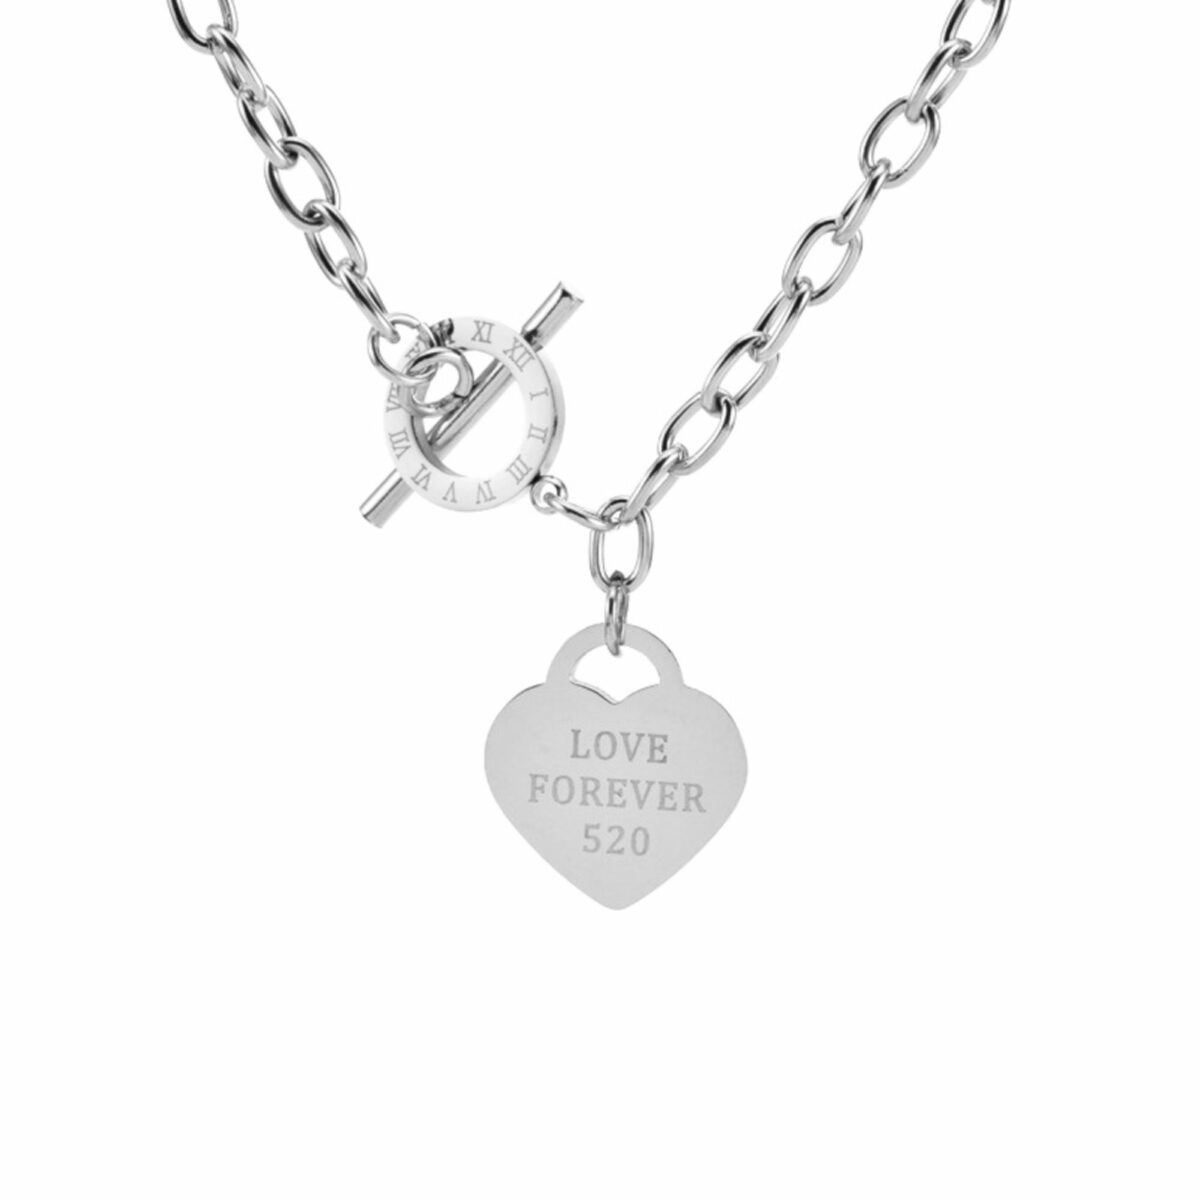 https://m.clubbella.co/product/silver-forever-heart-pendant-necklace/ 1674978432962-01